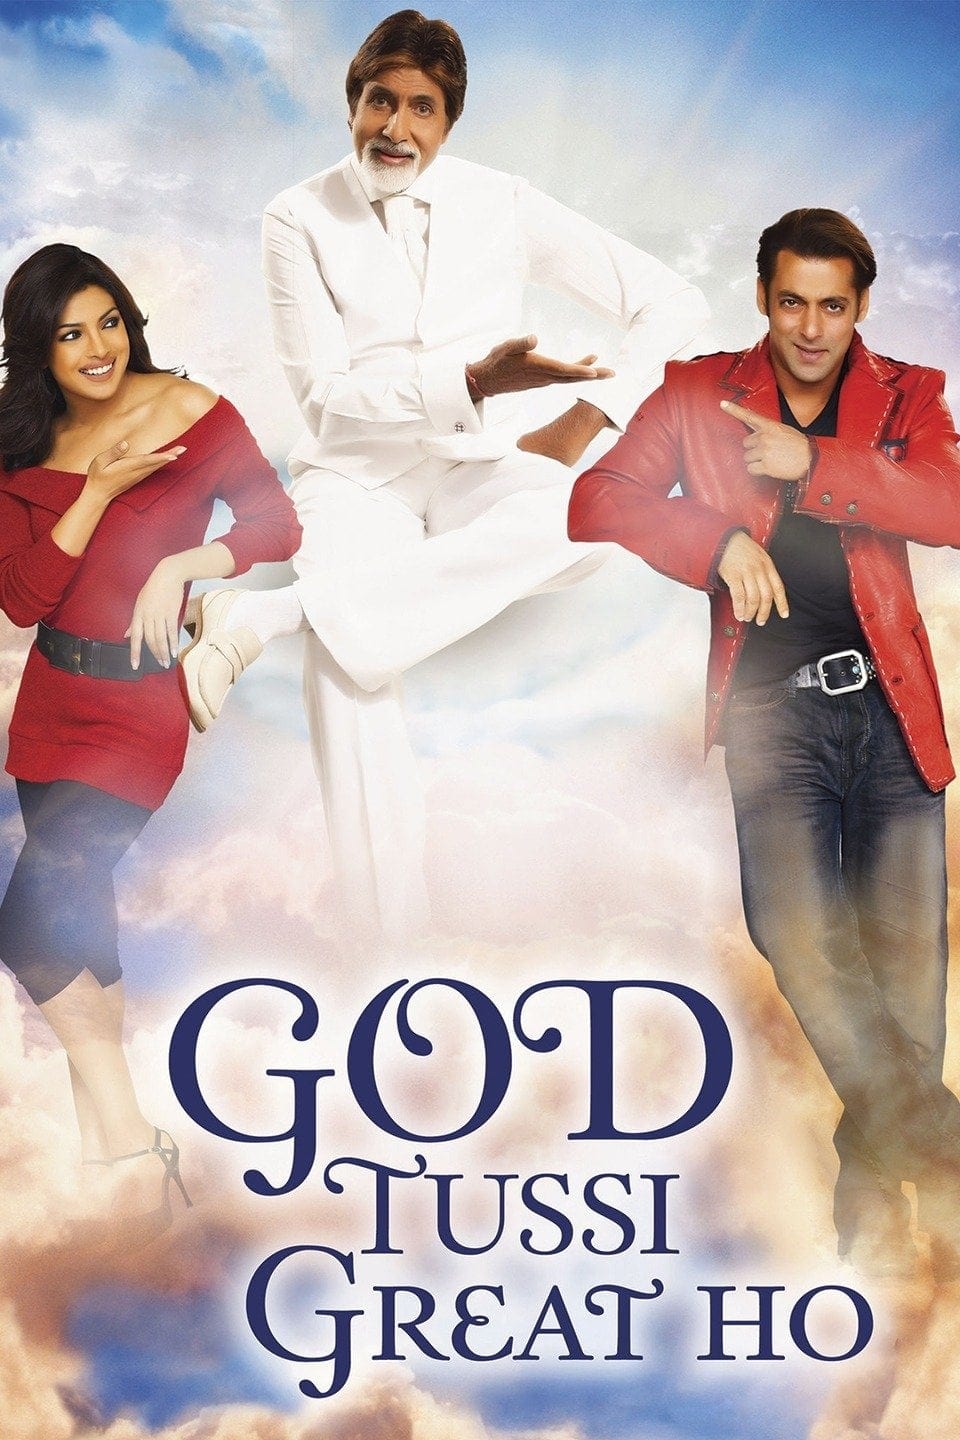 Poster for the movie "God Tussi Great Ho"